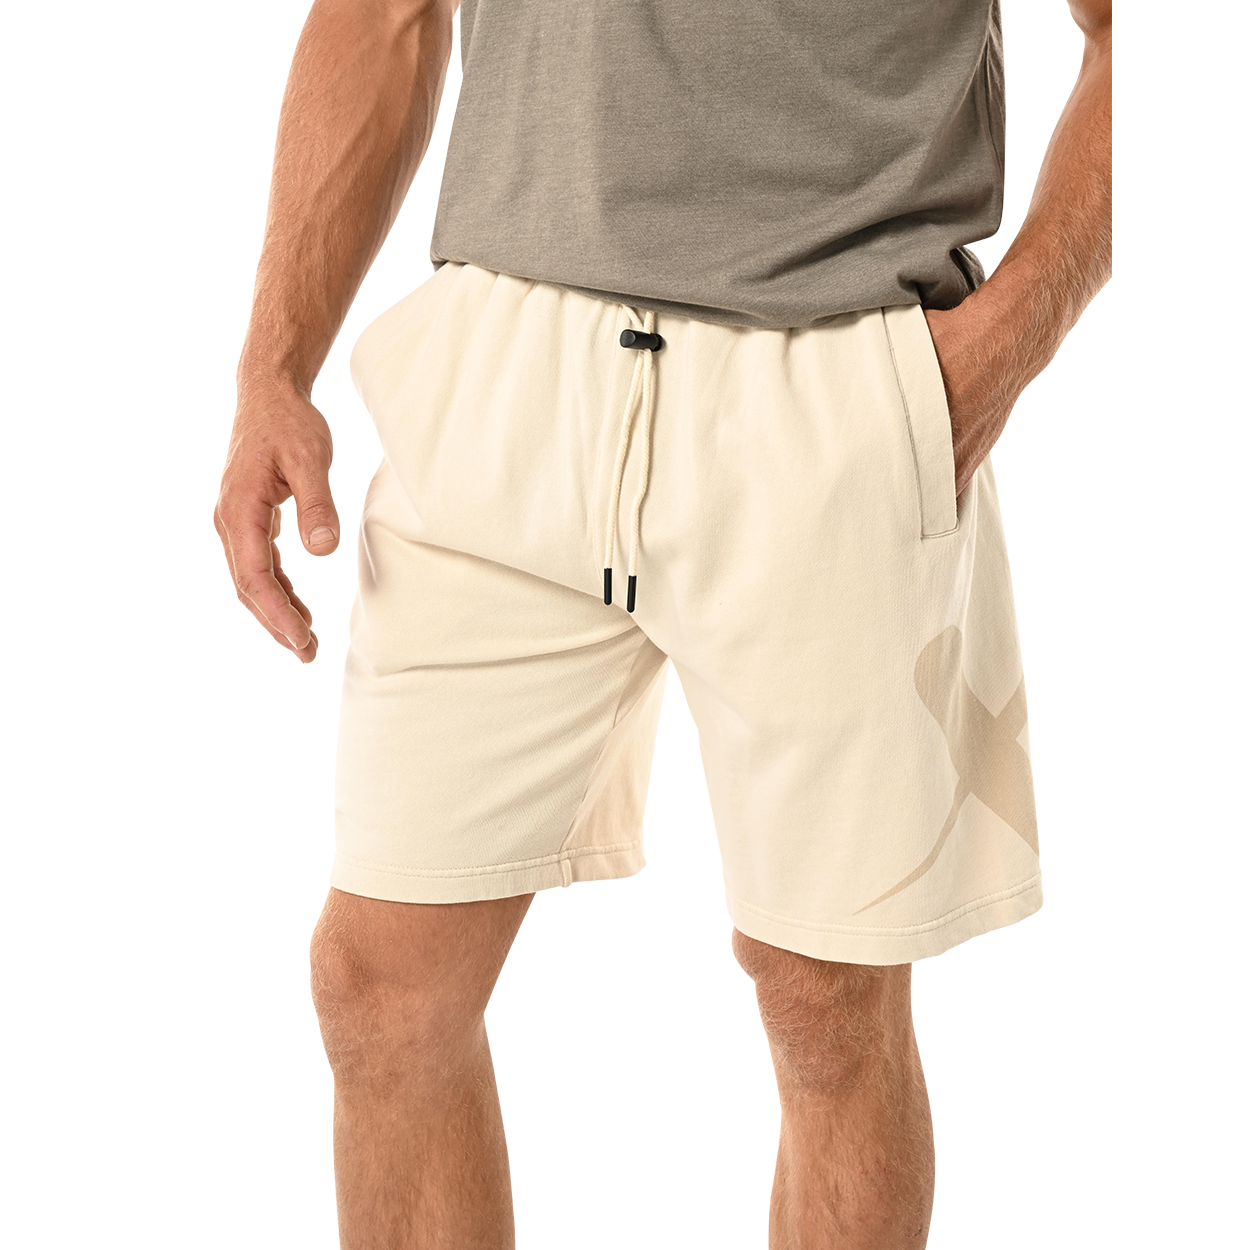 BAUER FRENCH TERRY KNIT SHORT SENIOR